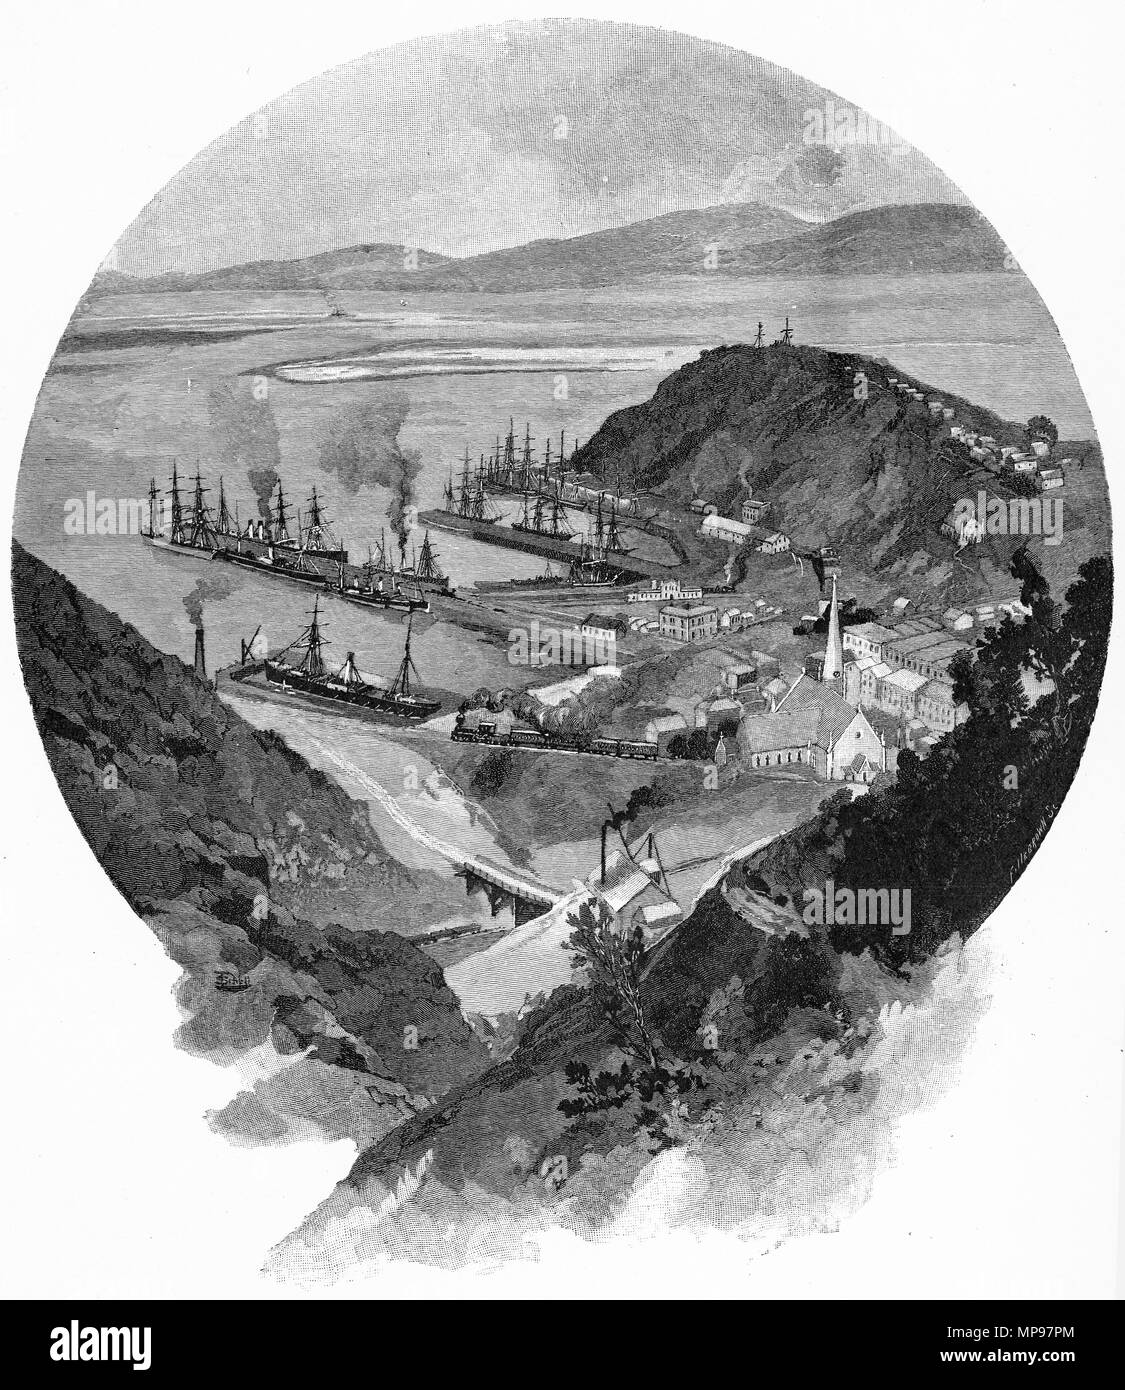 Engraving of Port Chalmers circa 1880, New Zealand. From the Picturesque Atlas of Australasia Vol 3, 1886 Stock Photo